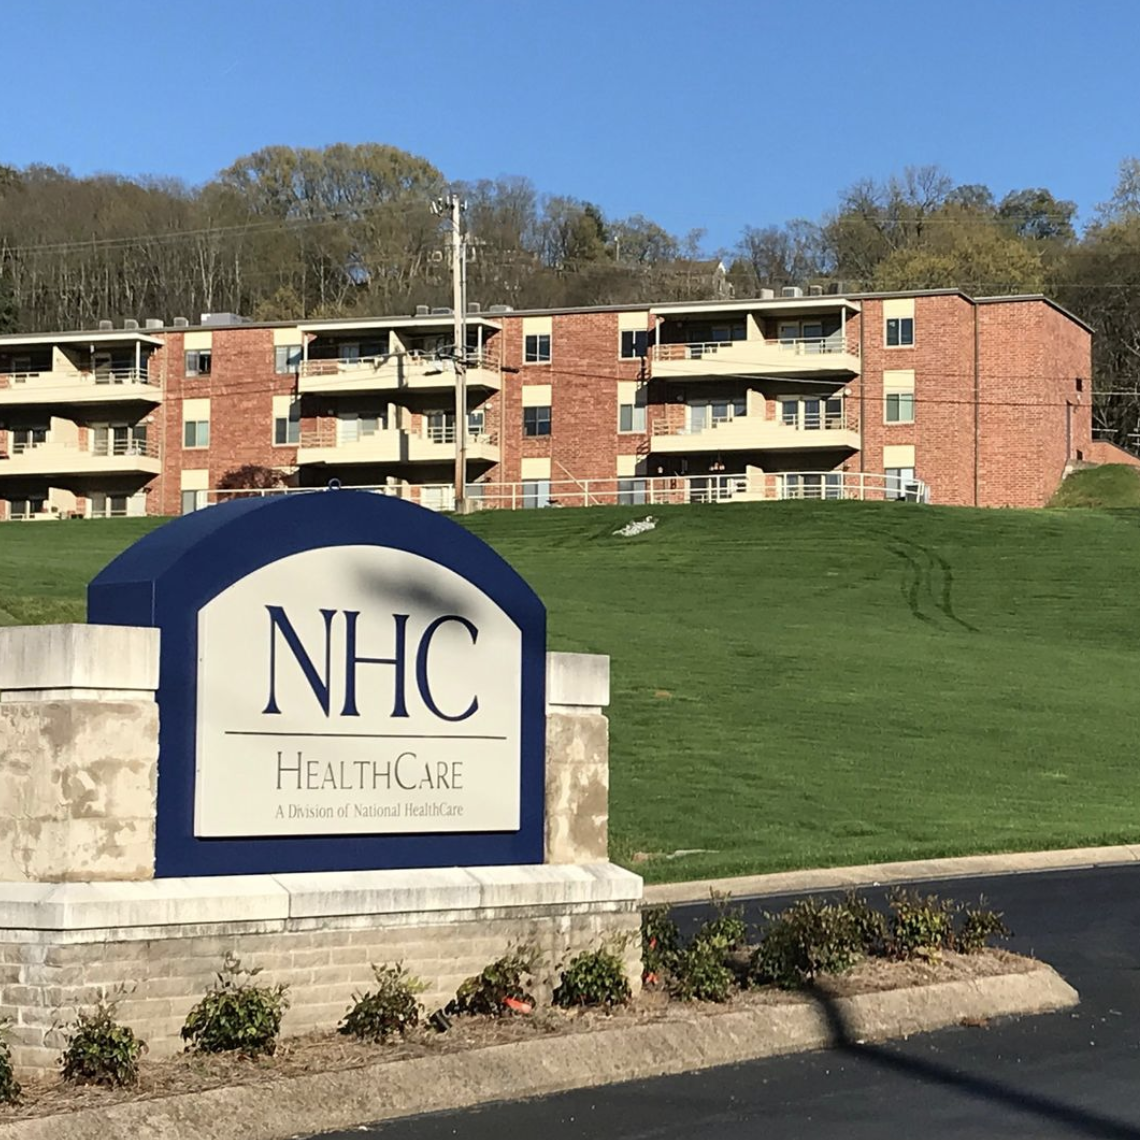 NHC Chattanooga Nursing Home Confirms Patient Tested Positive for COVID-19 Image